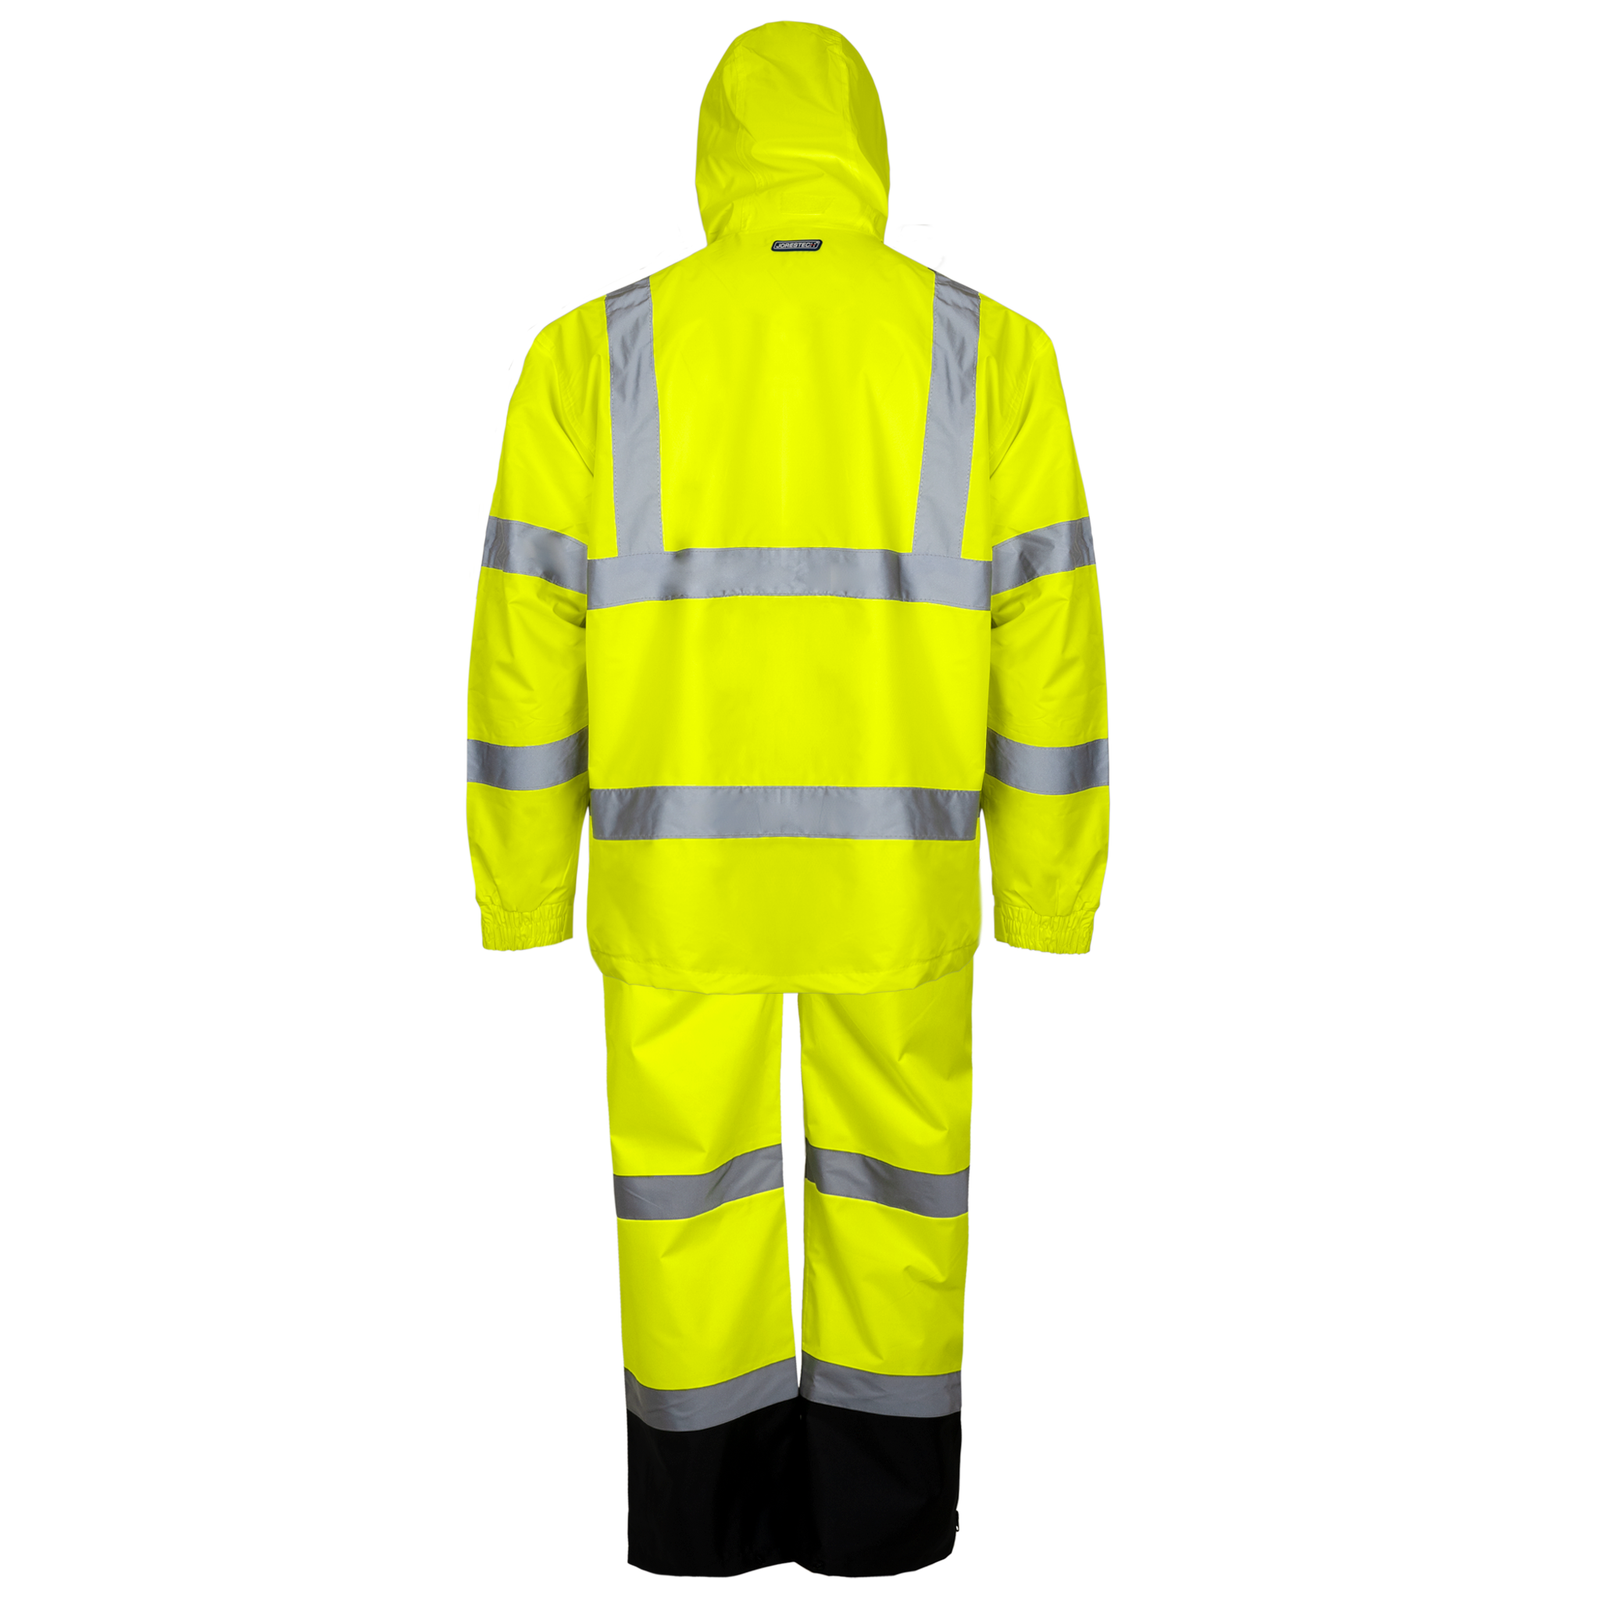 HI- visibility waterproof safety rain set overall pants and jacket with reflective strips